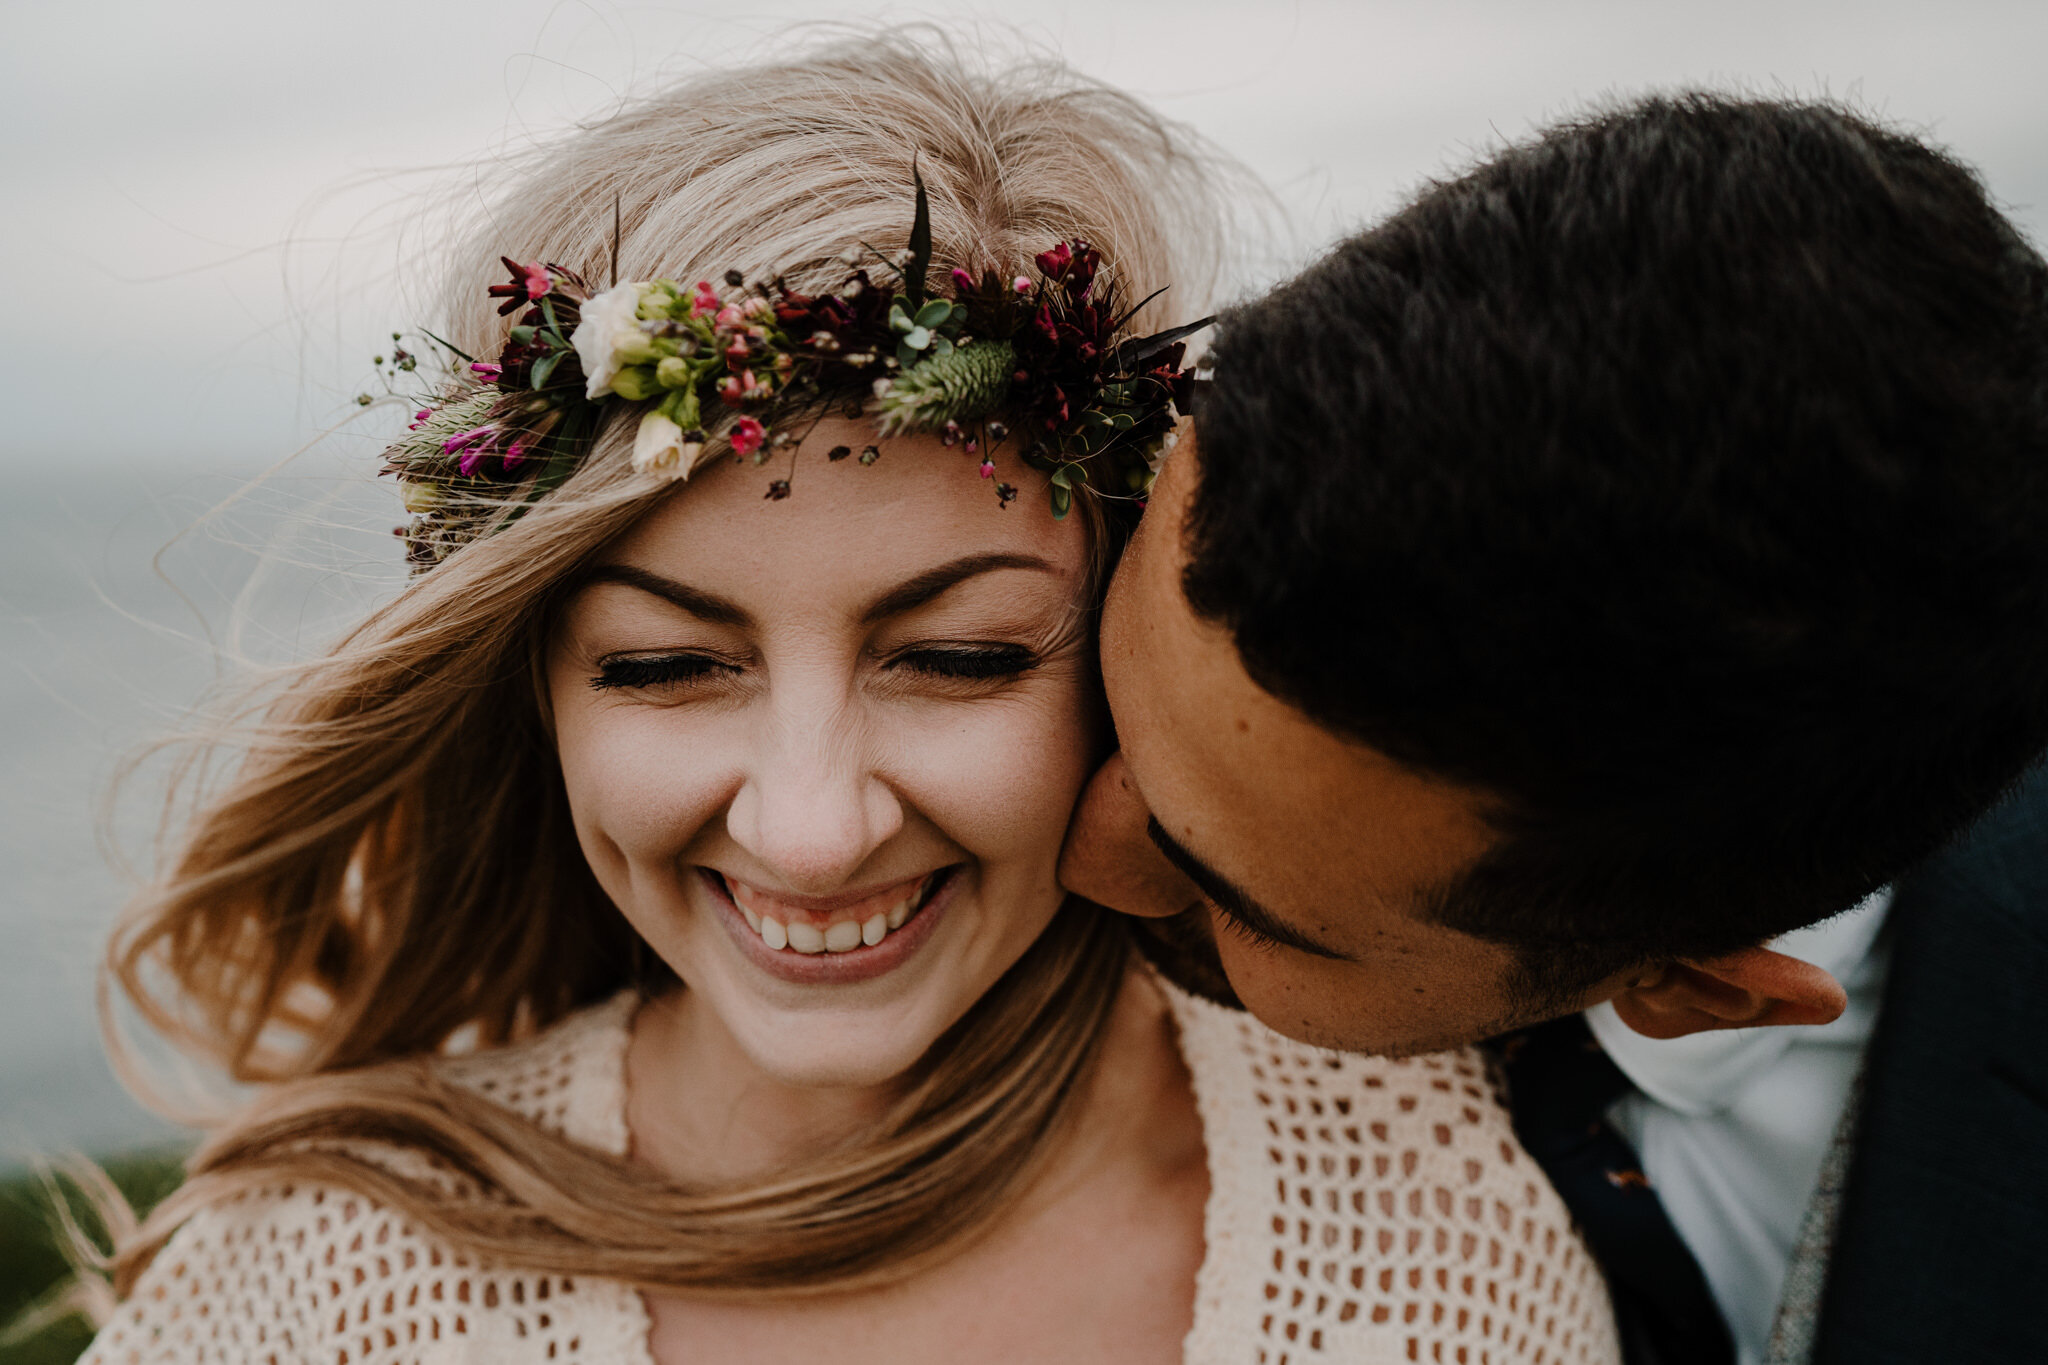 cute boho couple laughing close up kiss on cheek Cliffs of Moher ireland